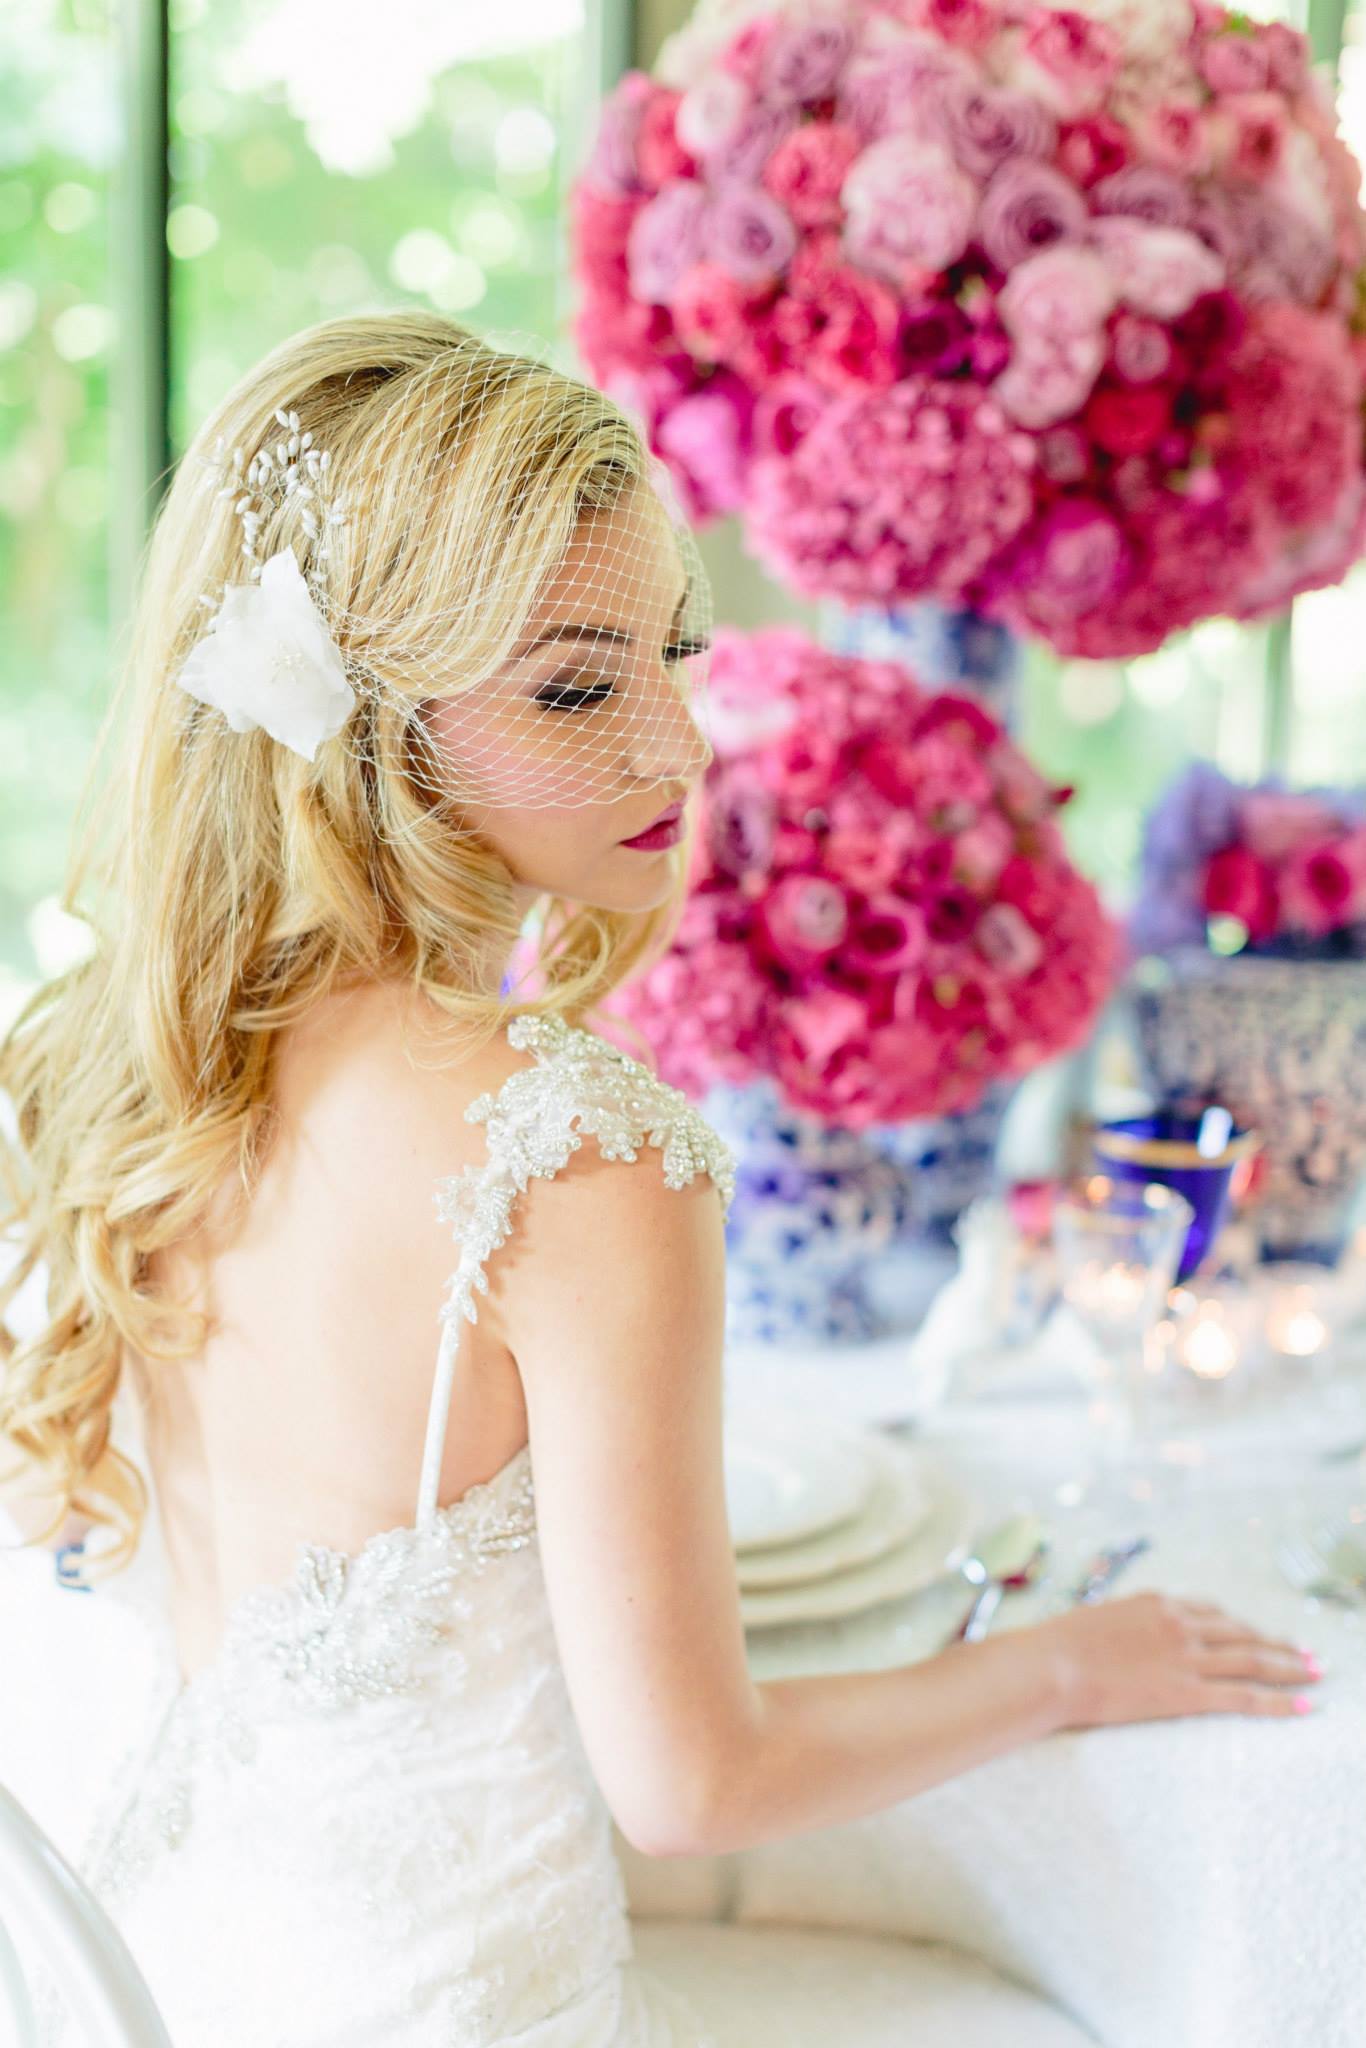 10 Ways To Incorporate Vintage Themes Into Your Wedding + Wedding Inspiration from Every Decade - Maggie Sottero Designs